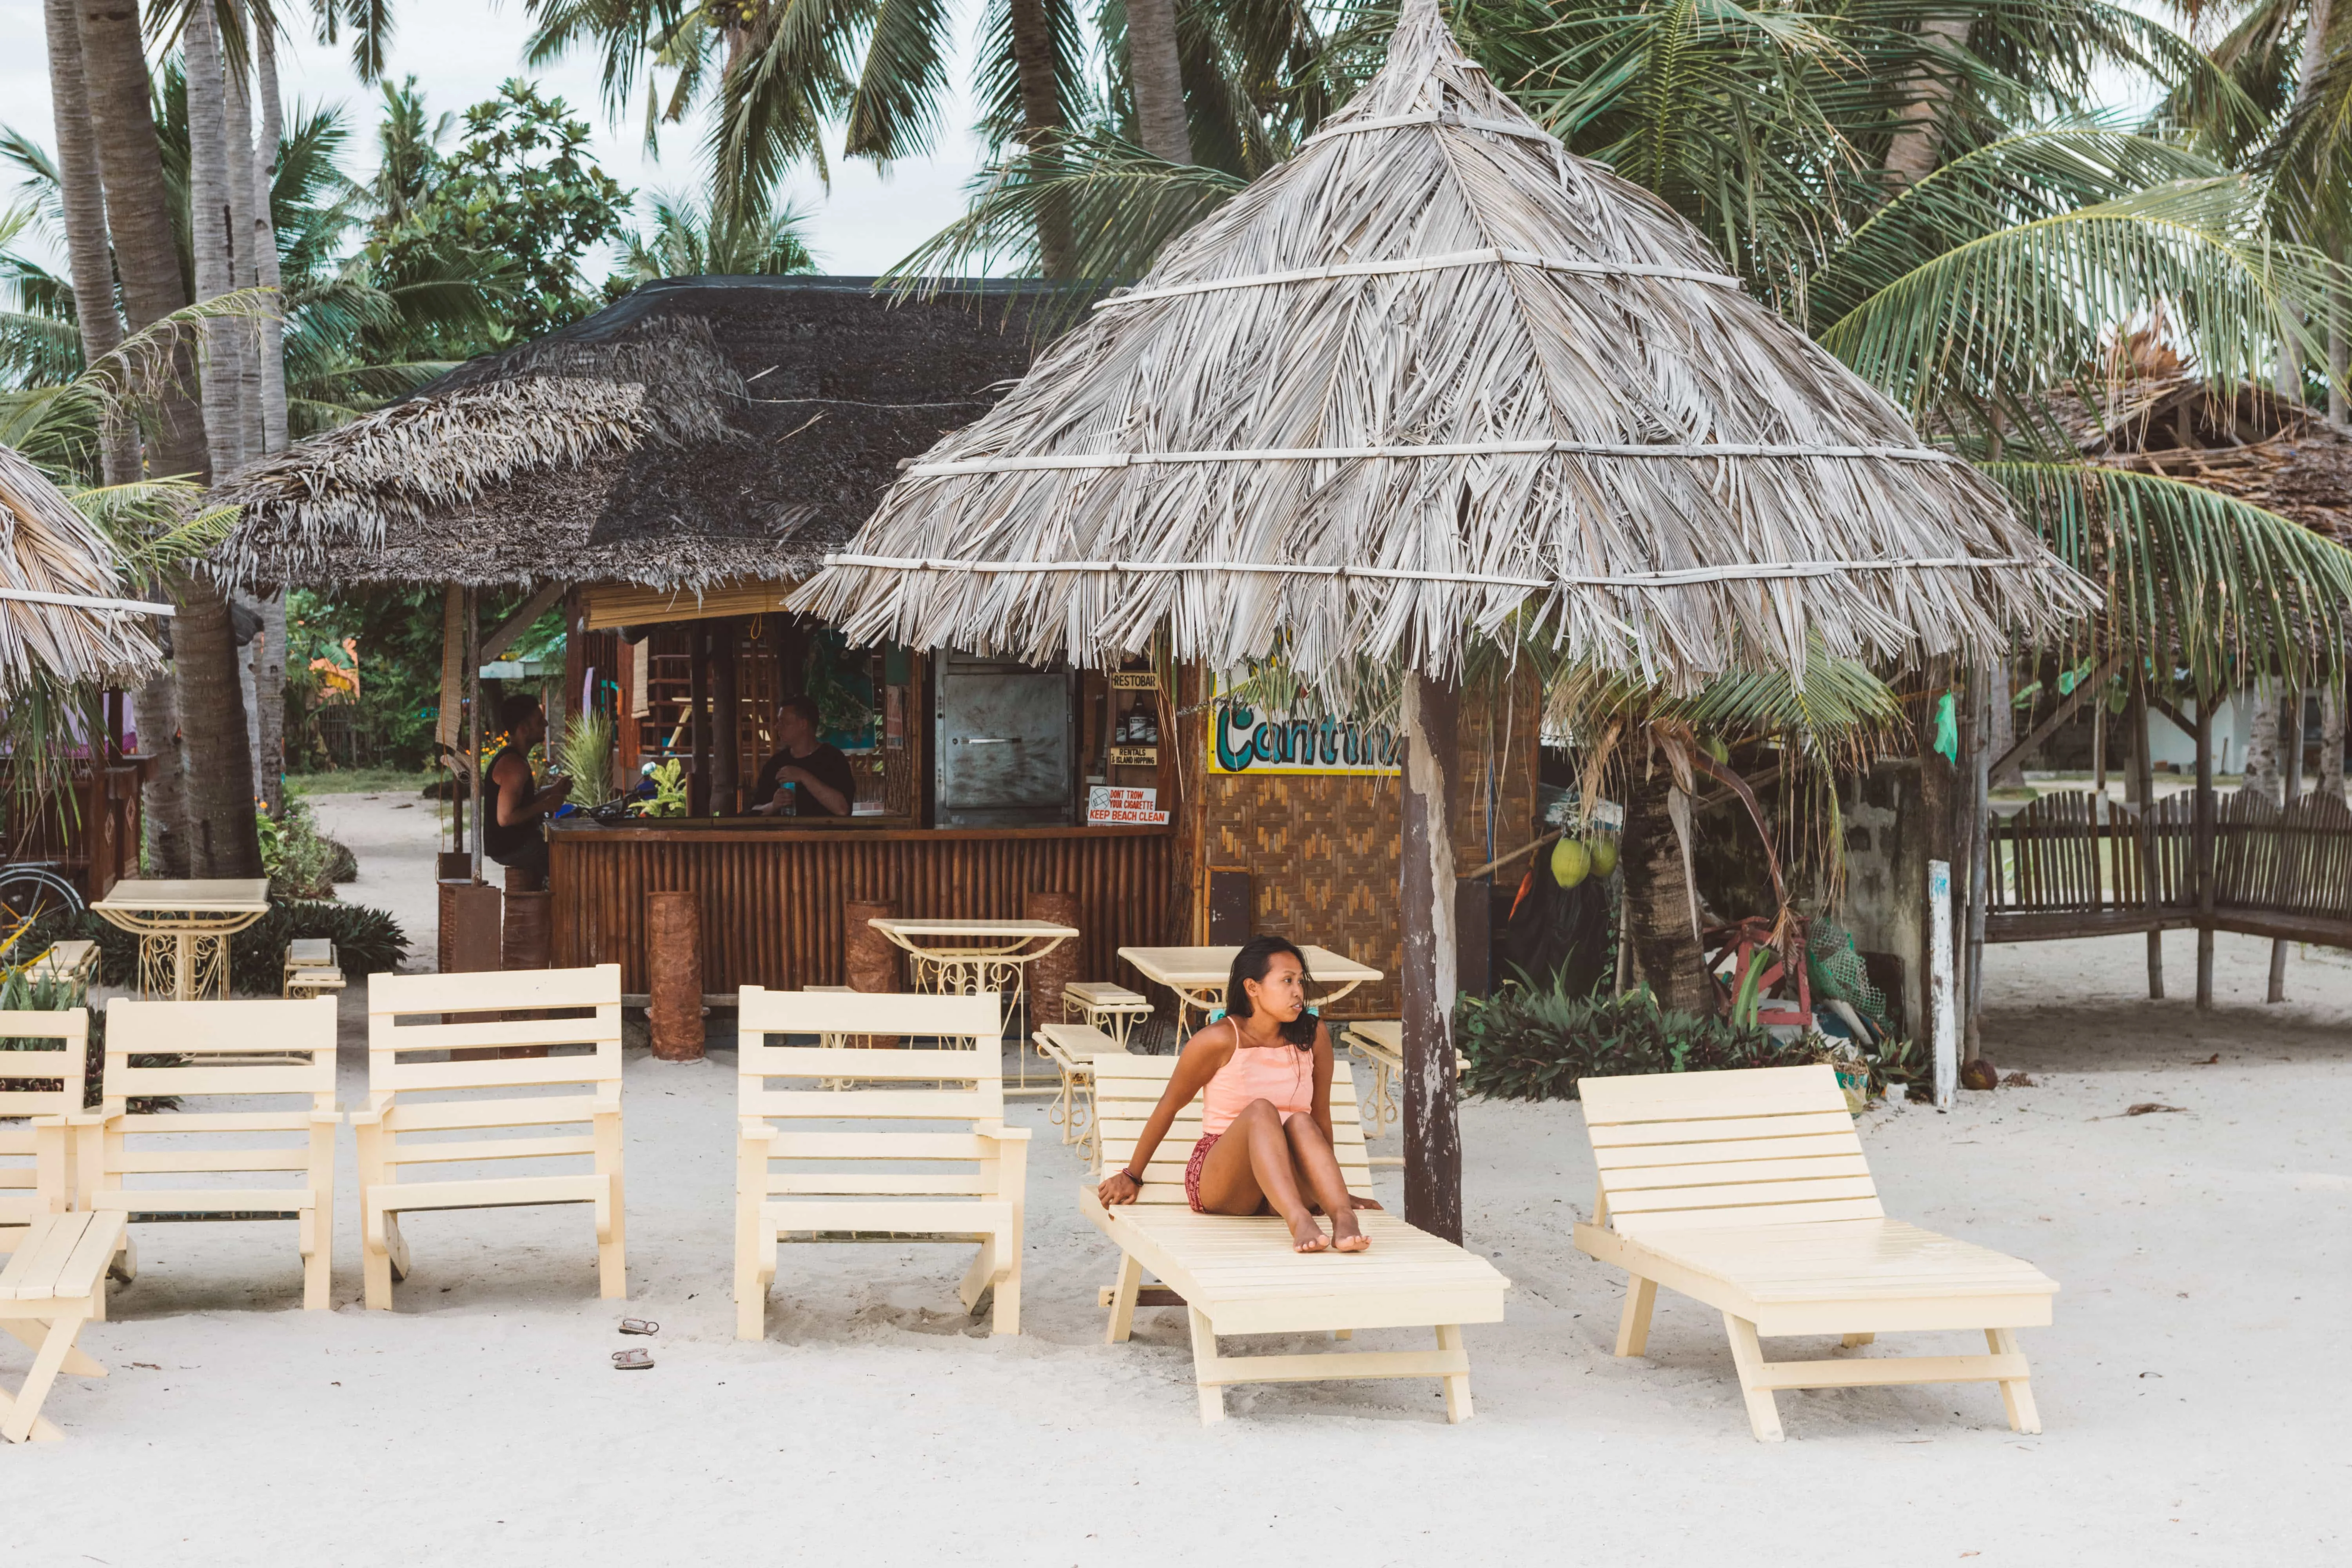 where to eat in bantayan, things to do in bantayan island, where to stay in Bantayan island virgin island bantayan, bantayan island island hopping, how to get to Bantayan Island